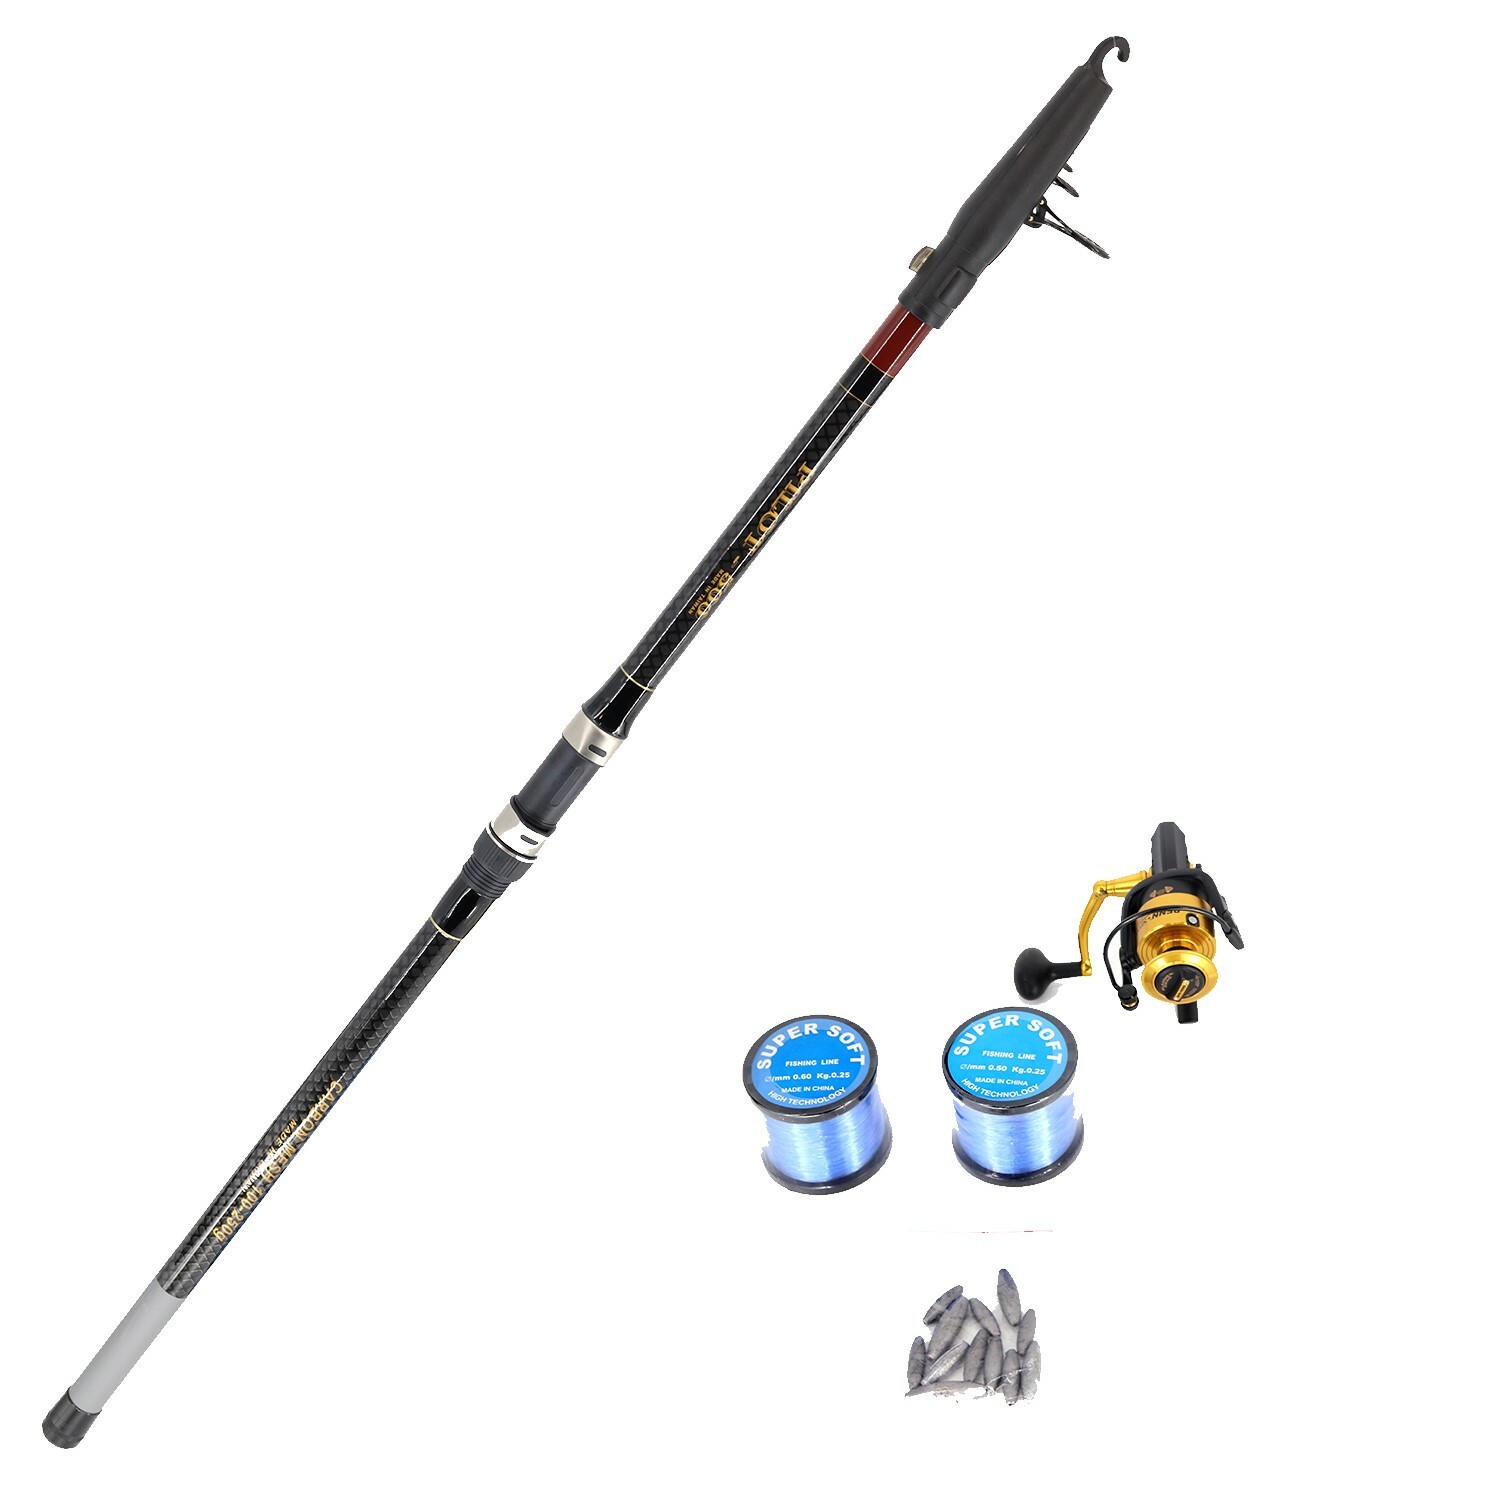 Shore Fishing (Pilot 5m and Penn V5500 including Nylon line with rigs and sinkers and snap swivels) Combo